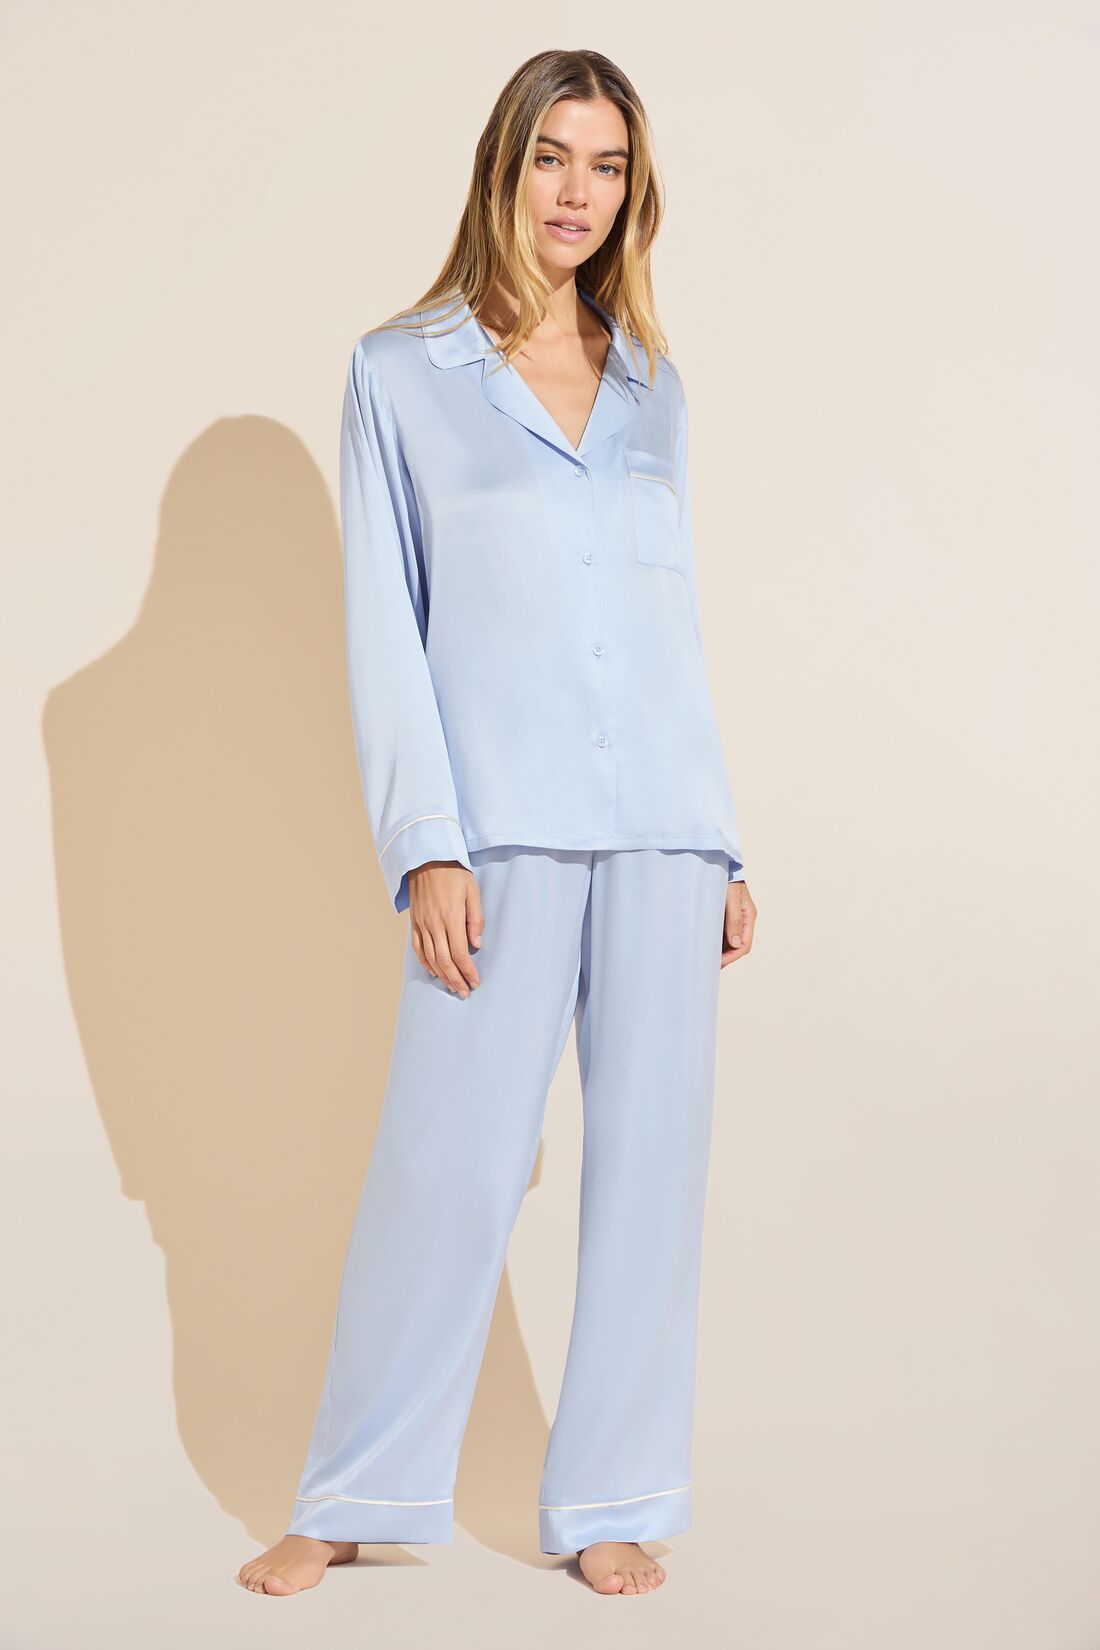 Sonoma Blue Pajama Sets for Women for sale